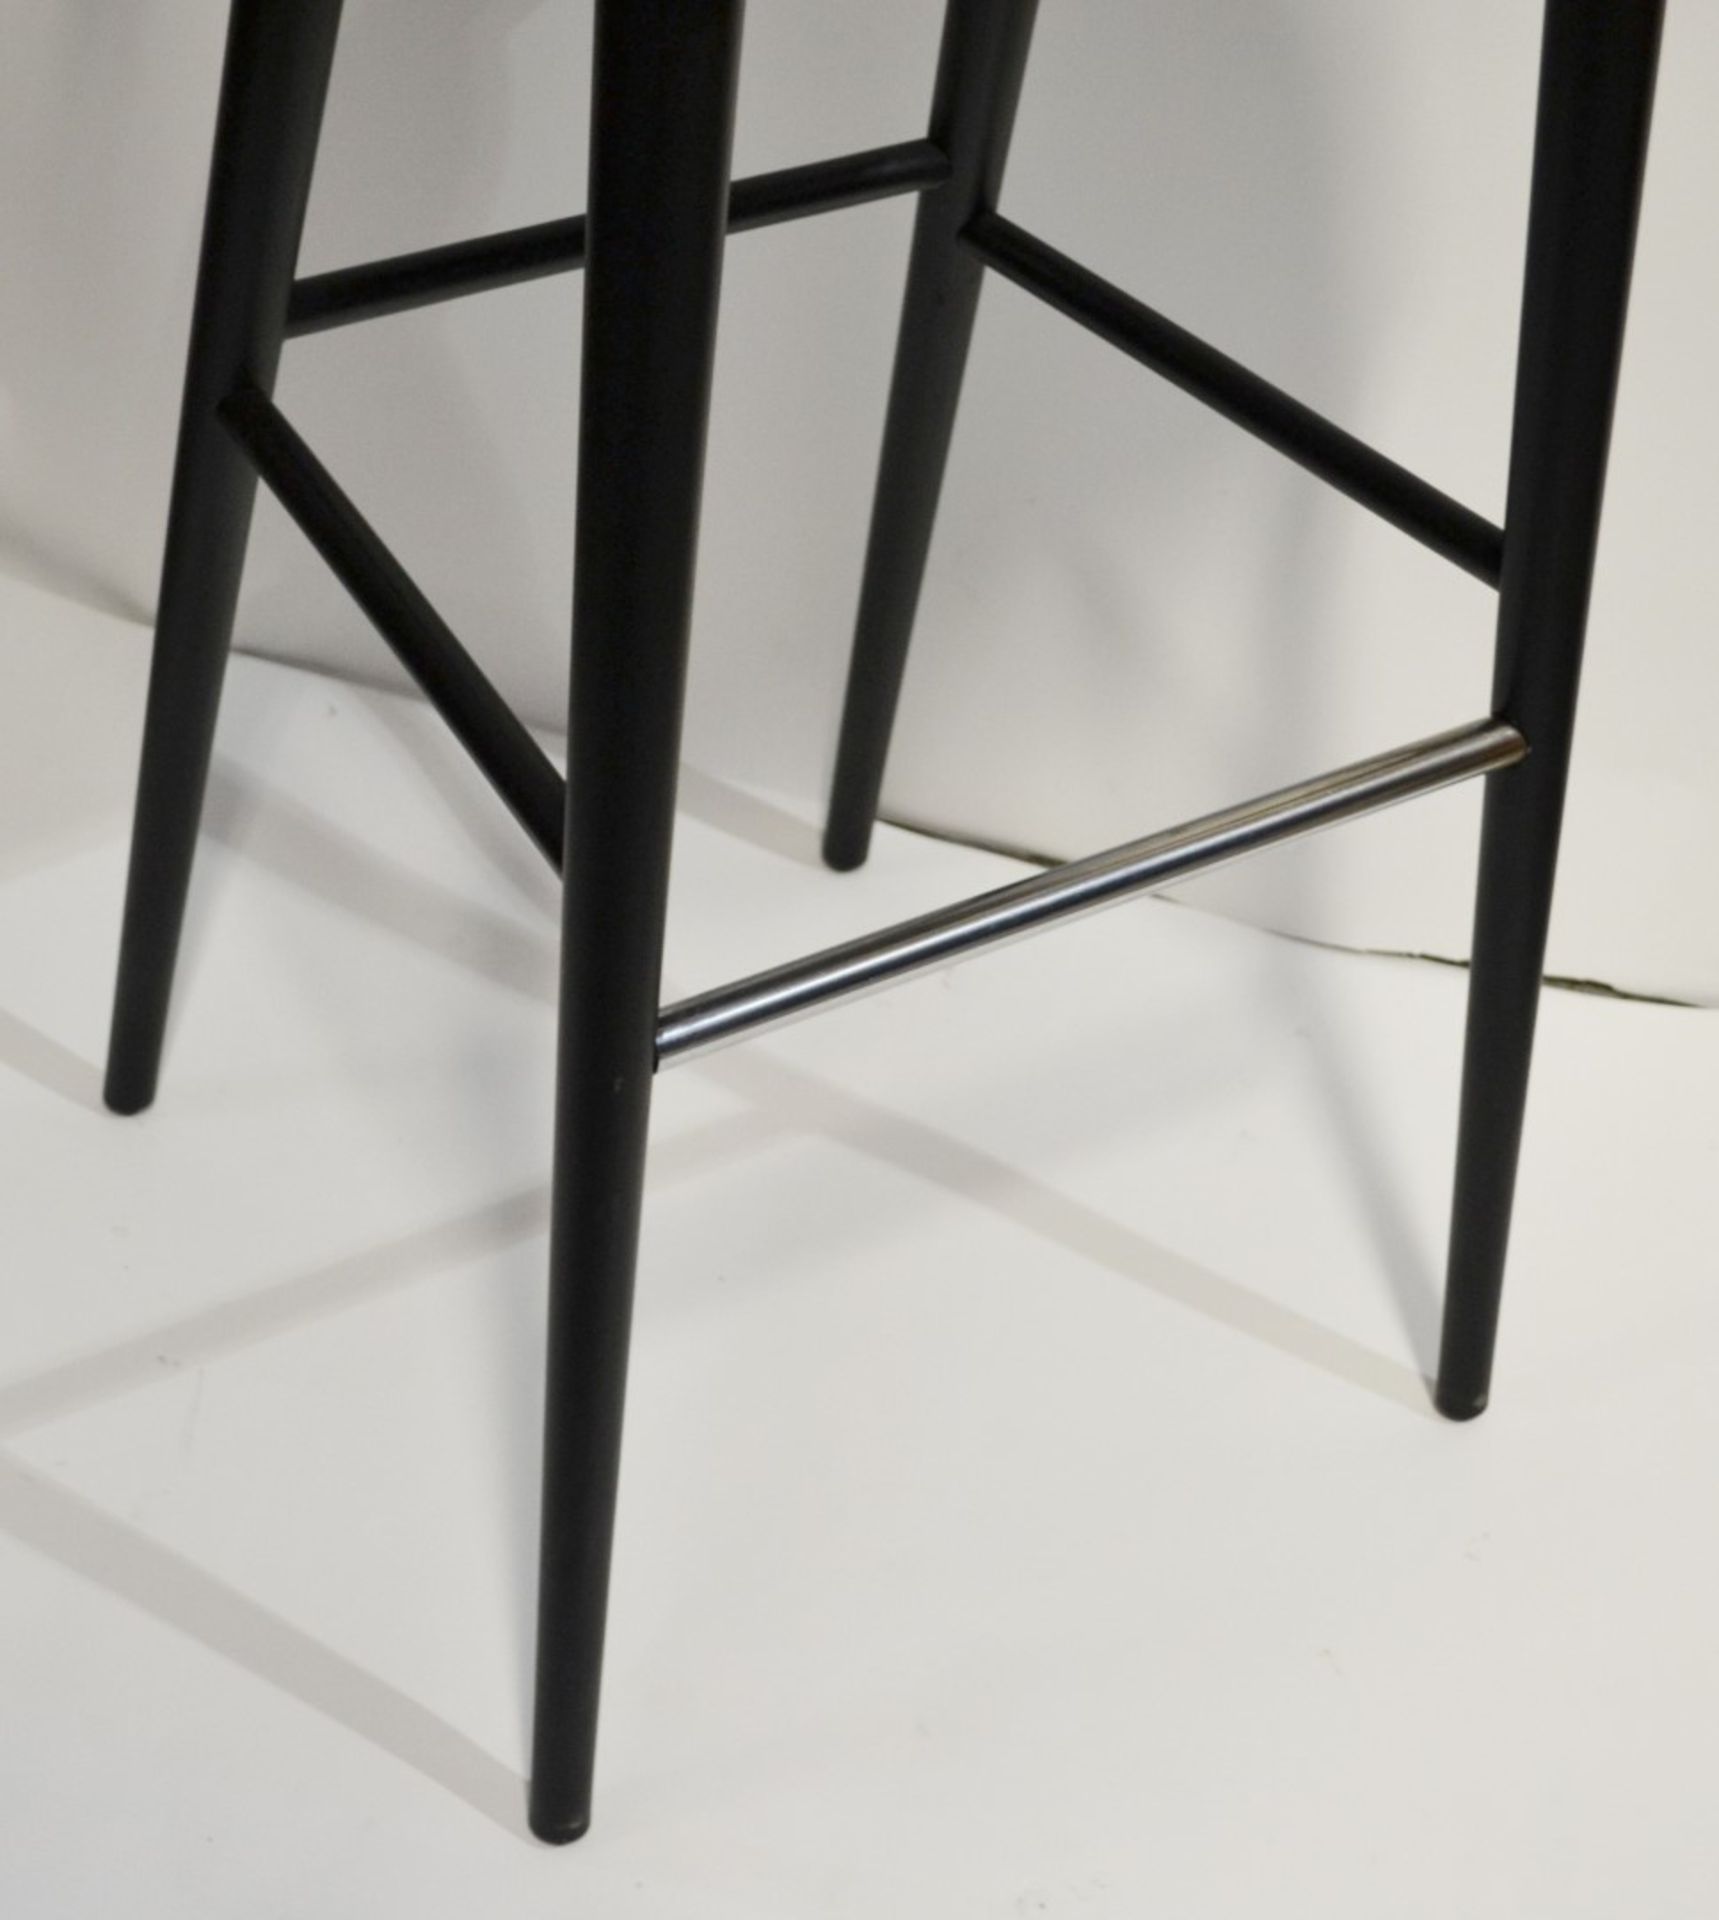 4 x Curved Spindleback Wooden Bar Stools With Shaped Seats, Chrome Footrests and Dark Finish - - Image 3 of 6